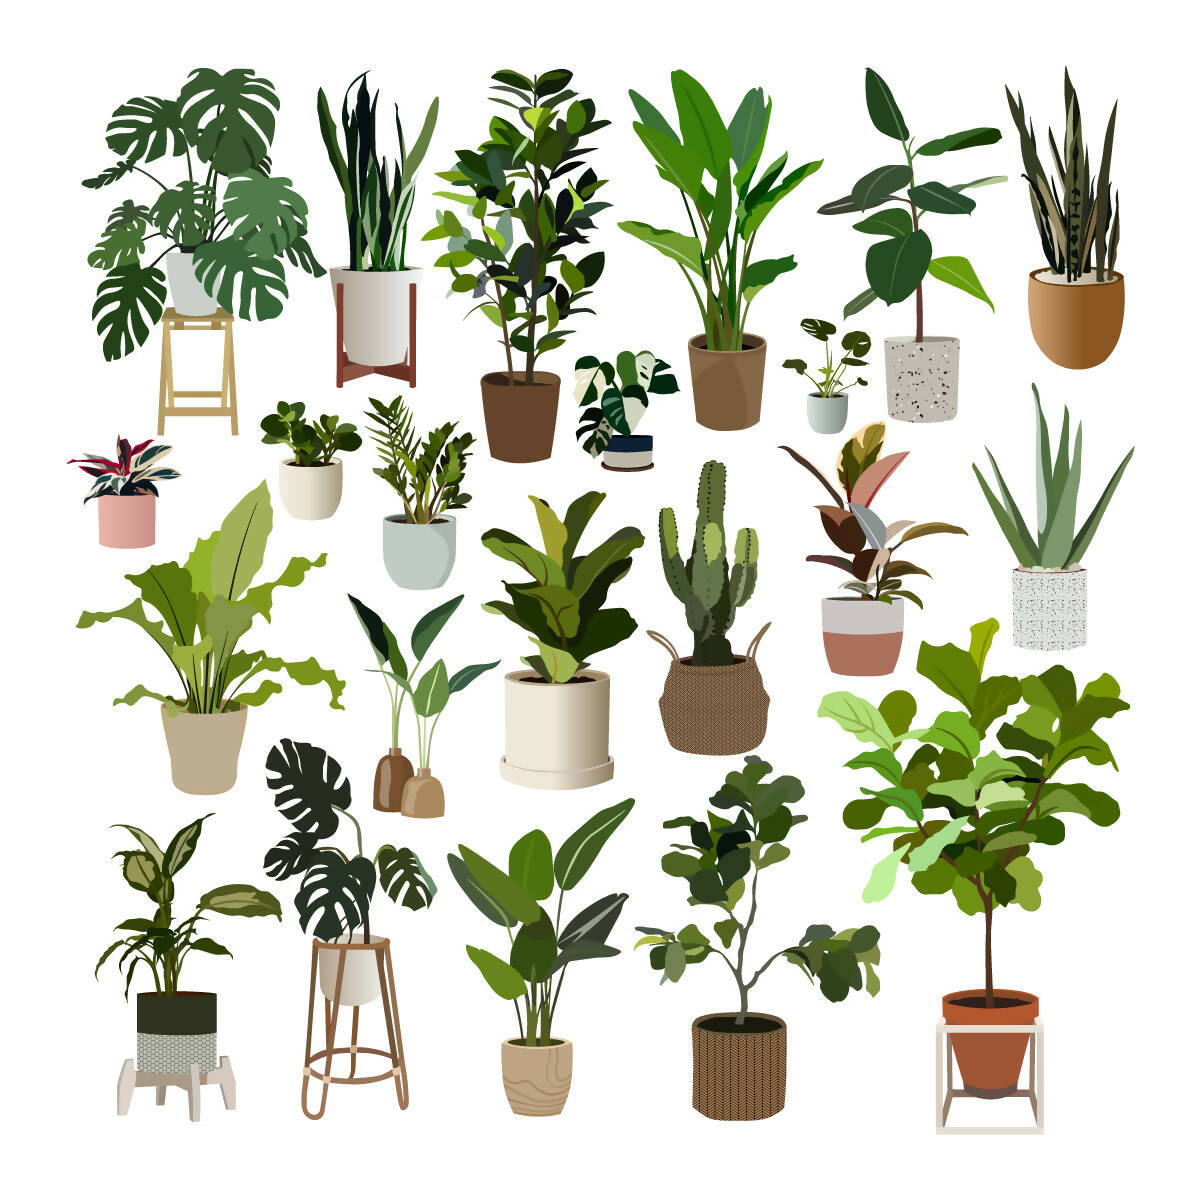 Flat Vector 22 Plants Pack | Learn Architecture Online